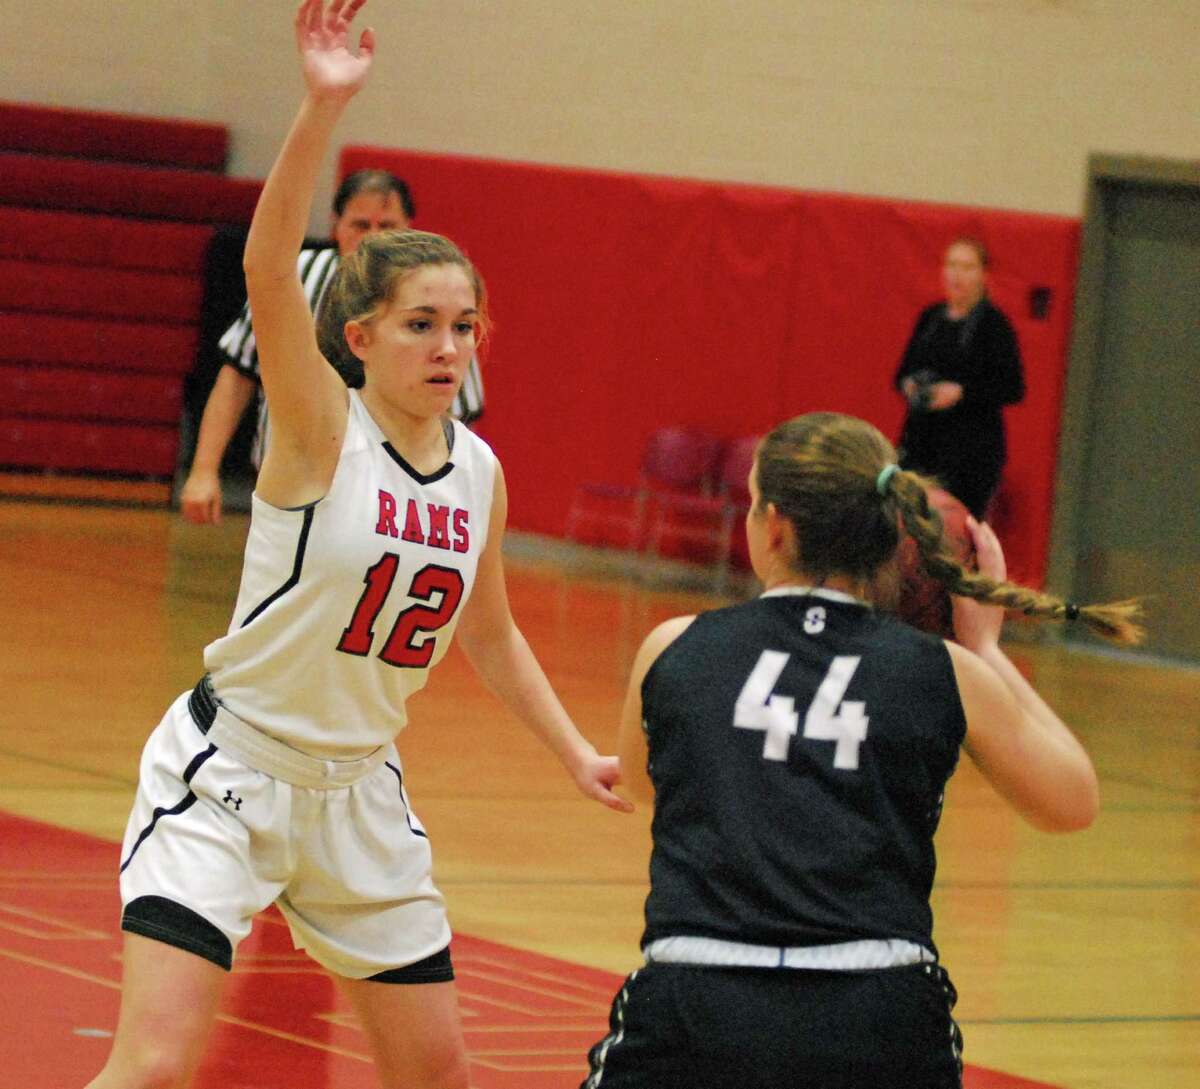 New Canaan's Leigh Charlton defends during a game against Staples on Monday.